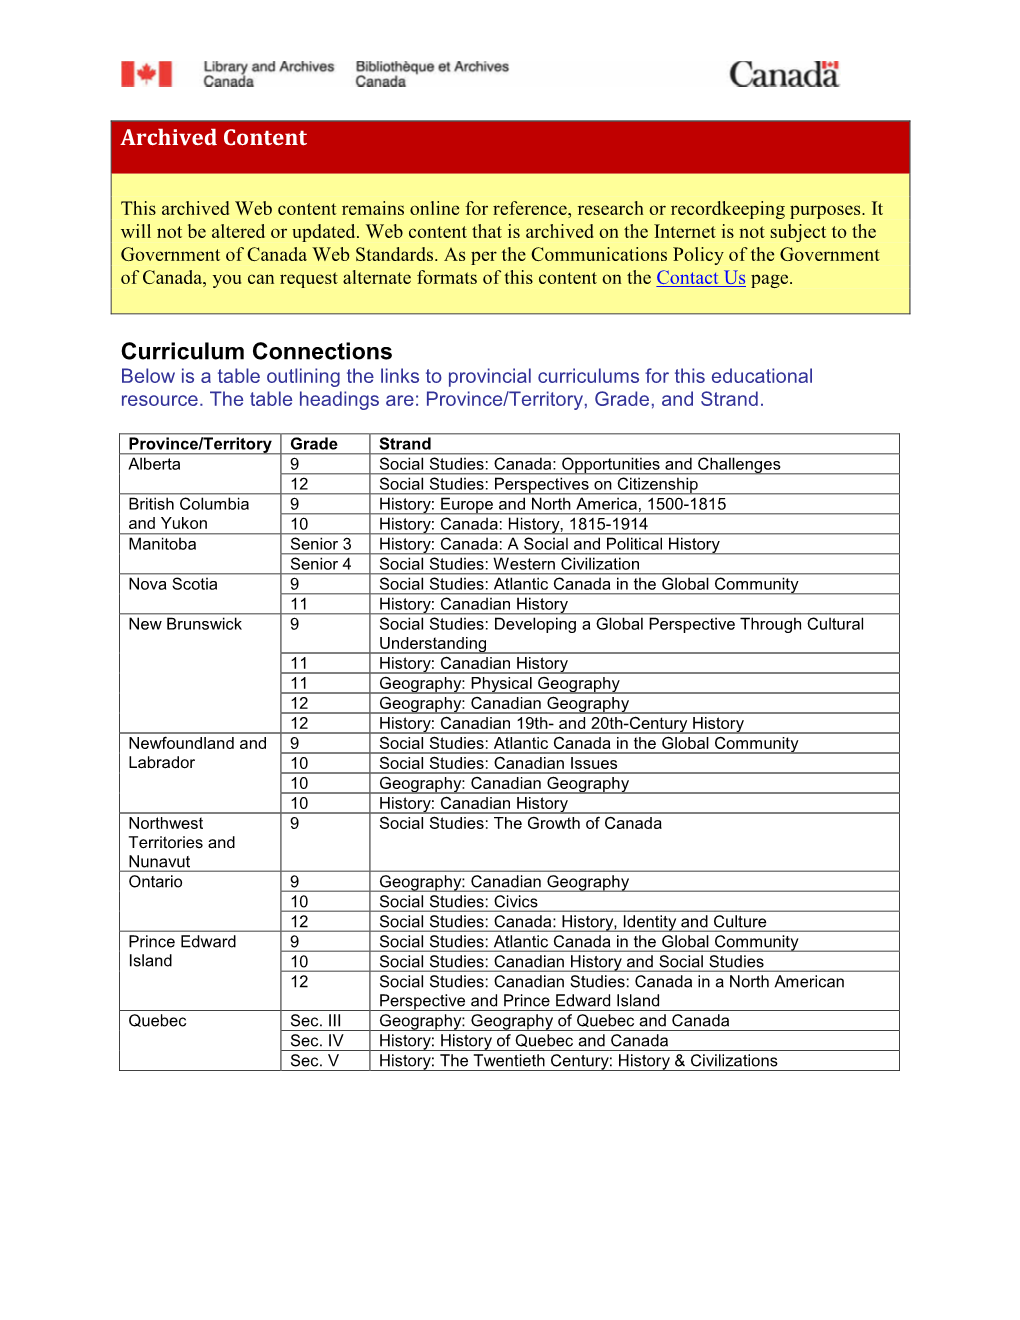 Curriculum Connections Below Is a Table Outlining the Links to Provincial Curriculums for This Educational Resource